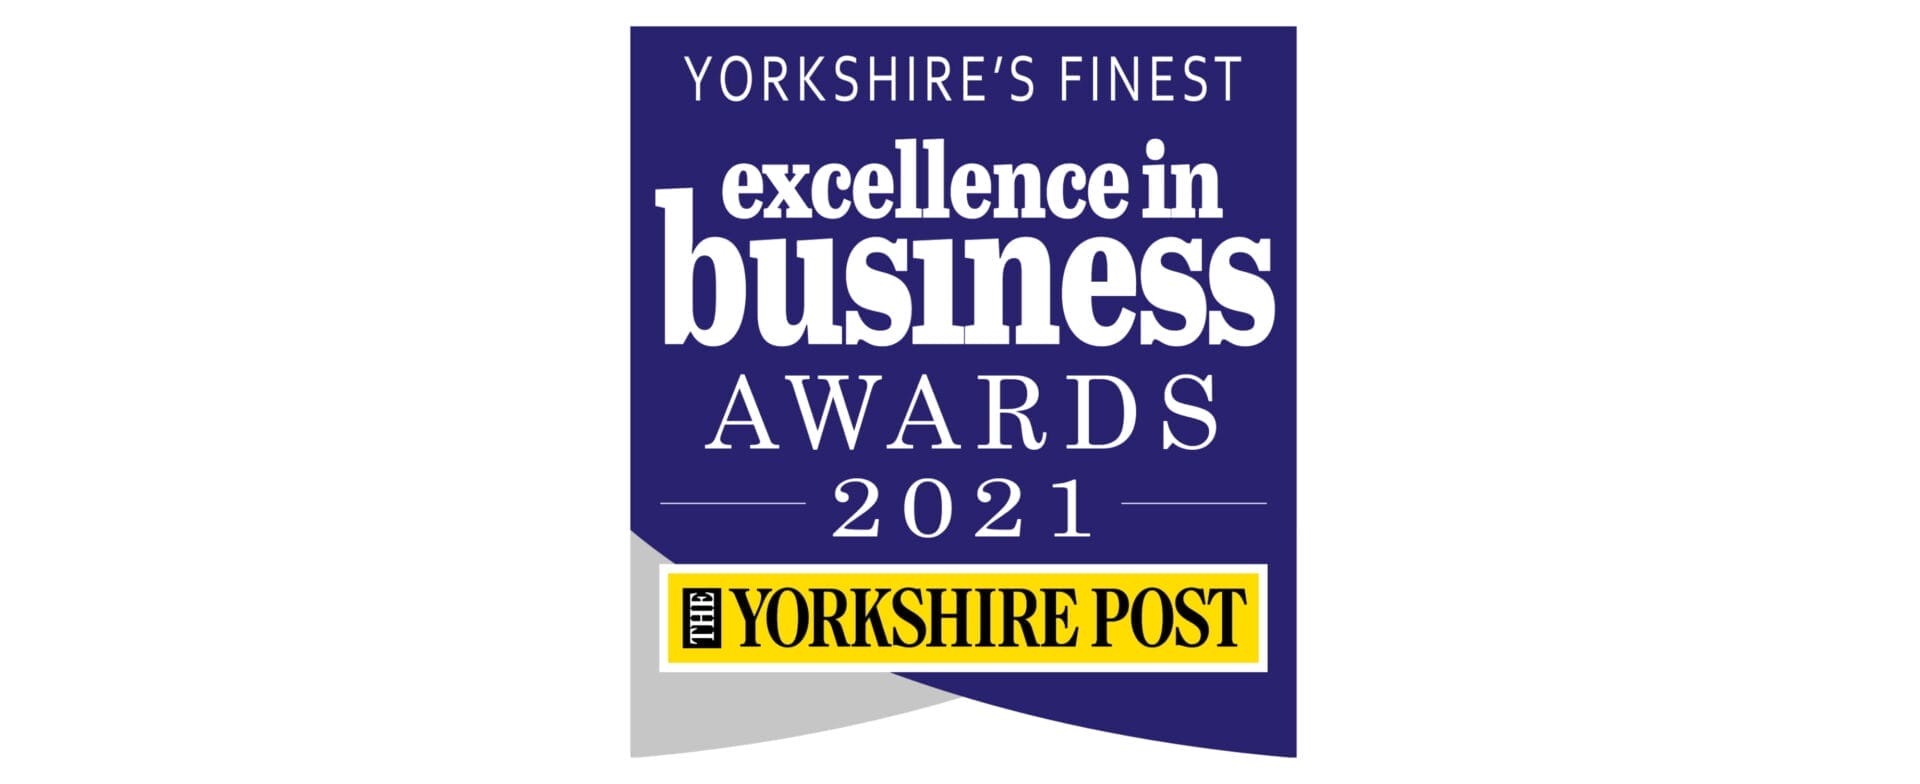 yorkshire-post-excellence-in-business-awards-2021-3